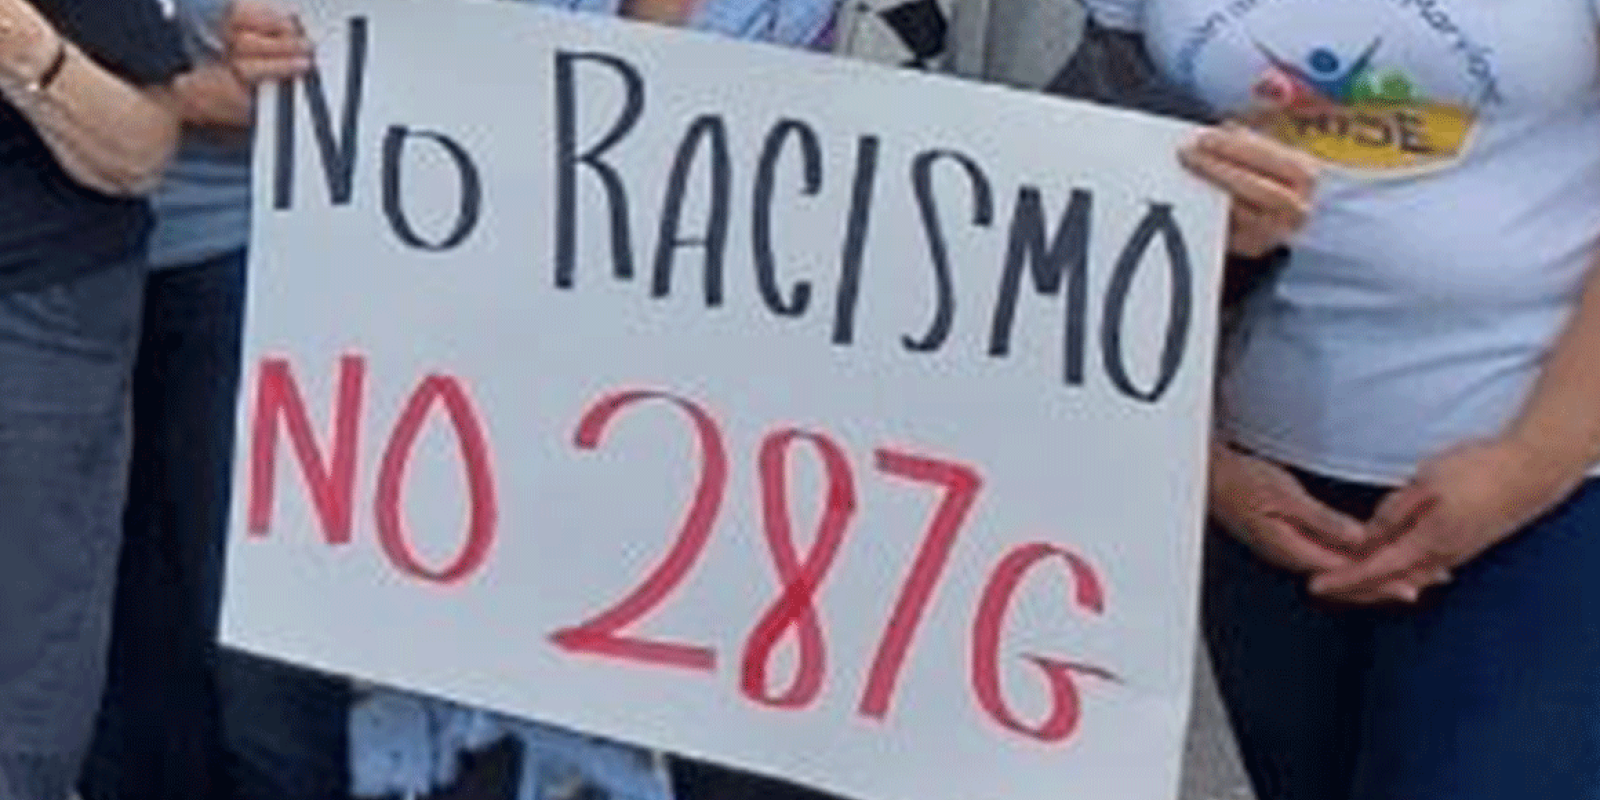 People hands shown holding a protest sign that says, "No Racismo, no 287g."